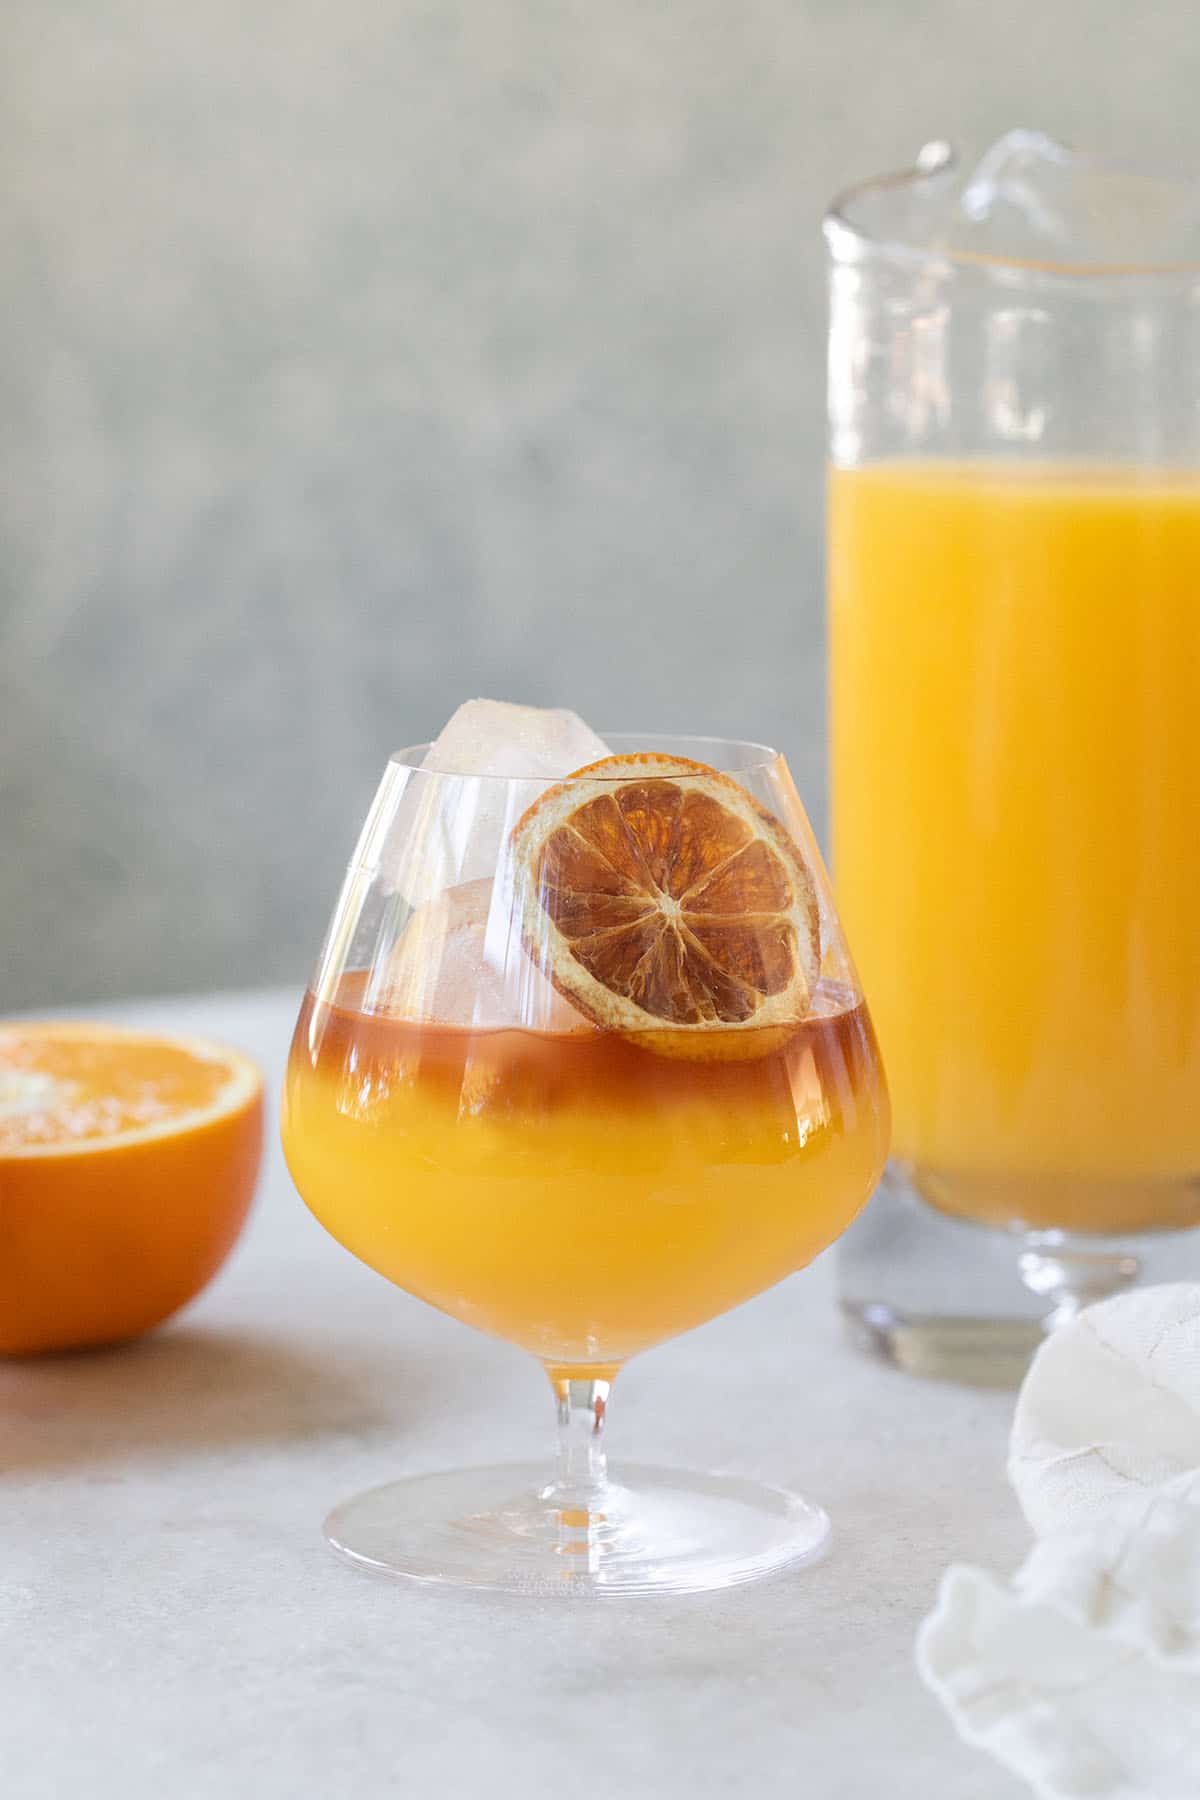 coconut rum and orange juice drink with a flower